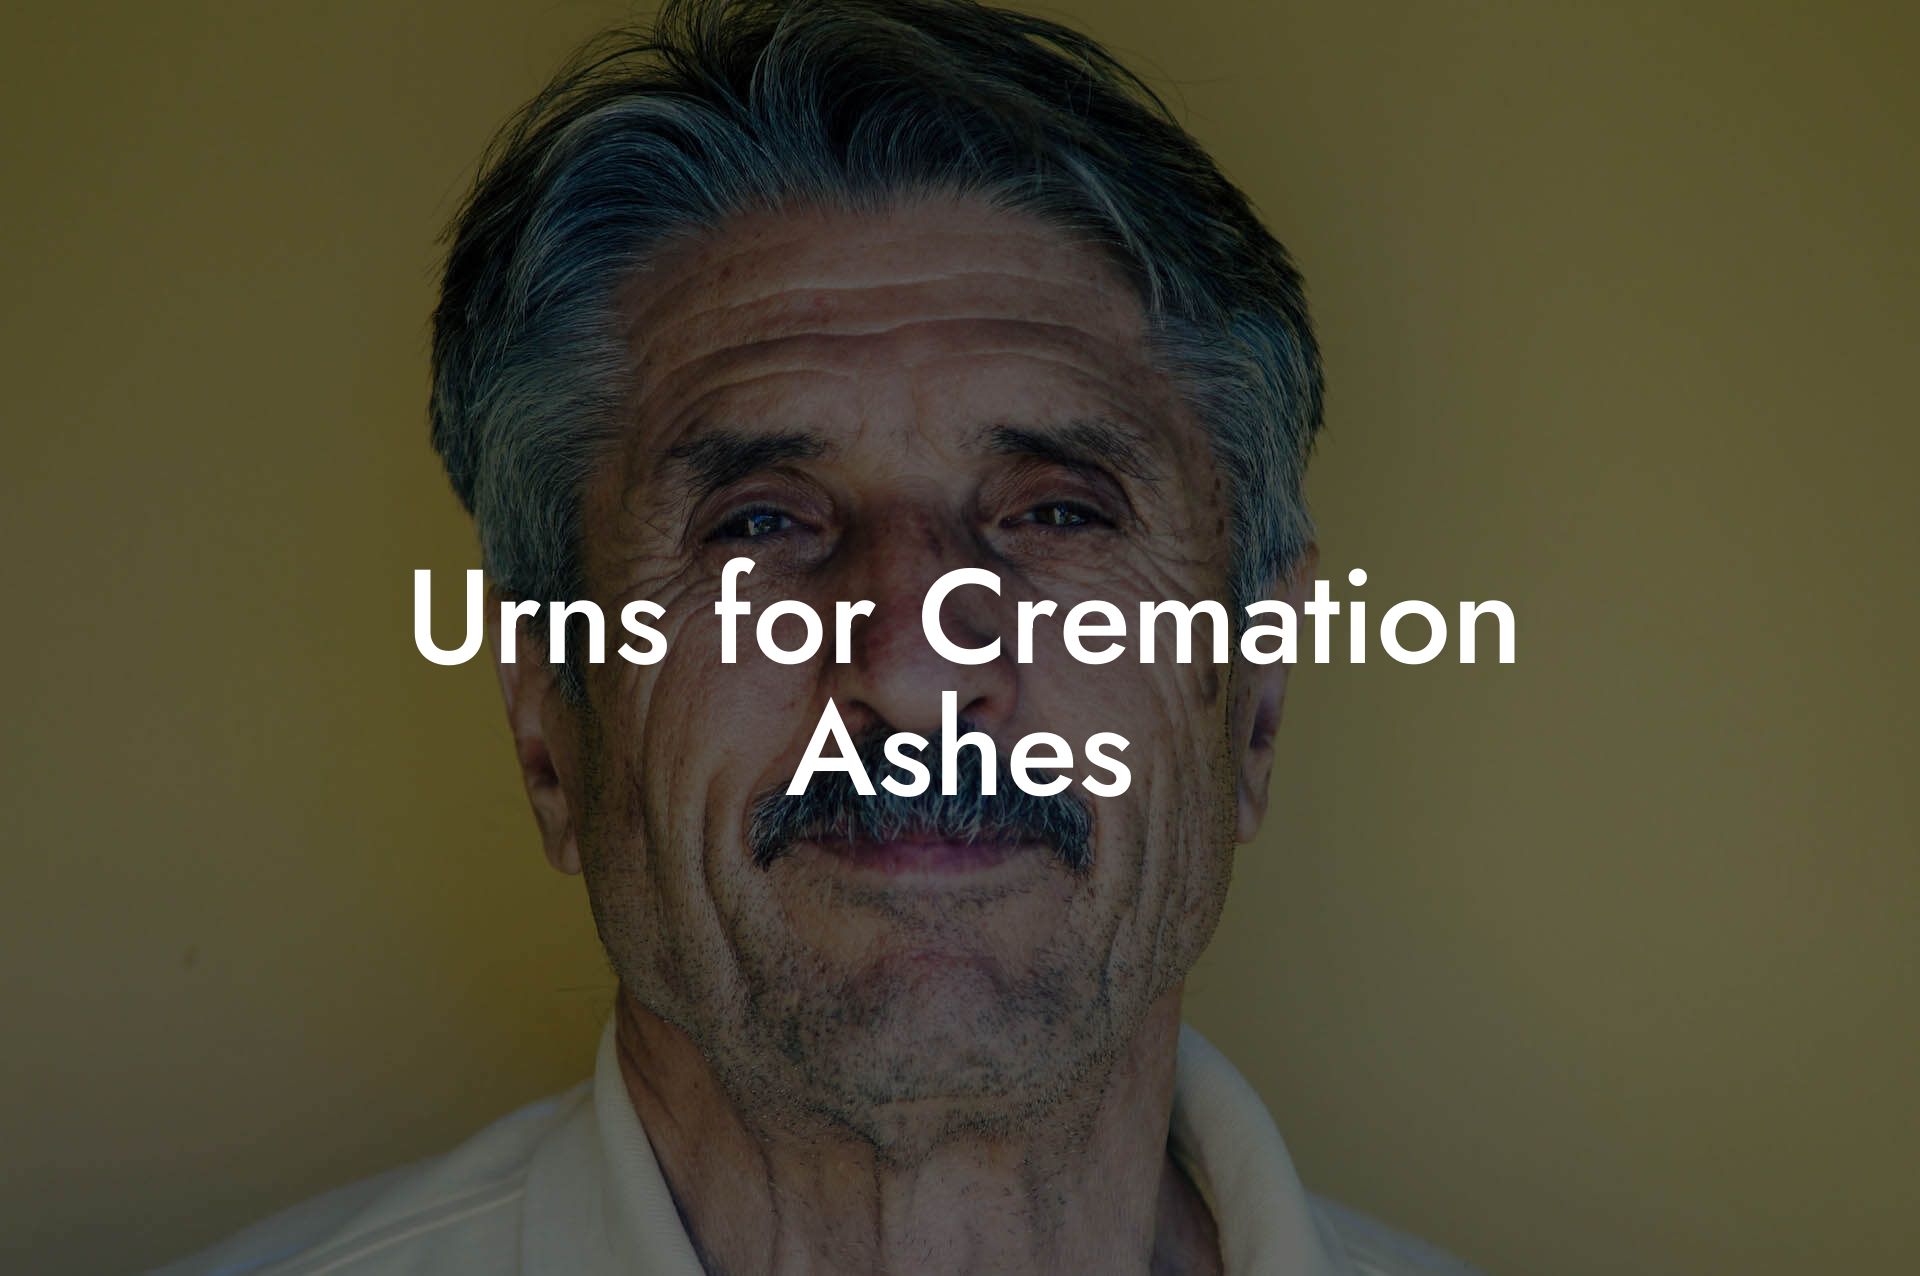 Urns for Cremation Ashes